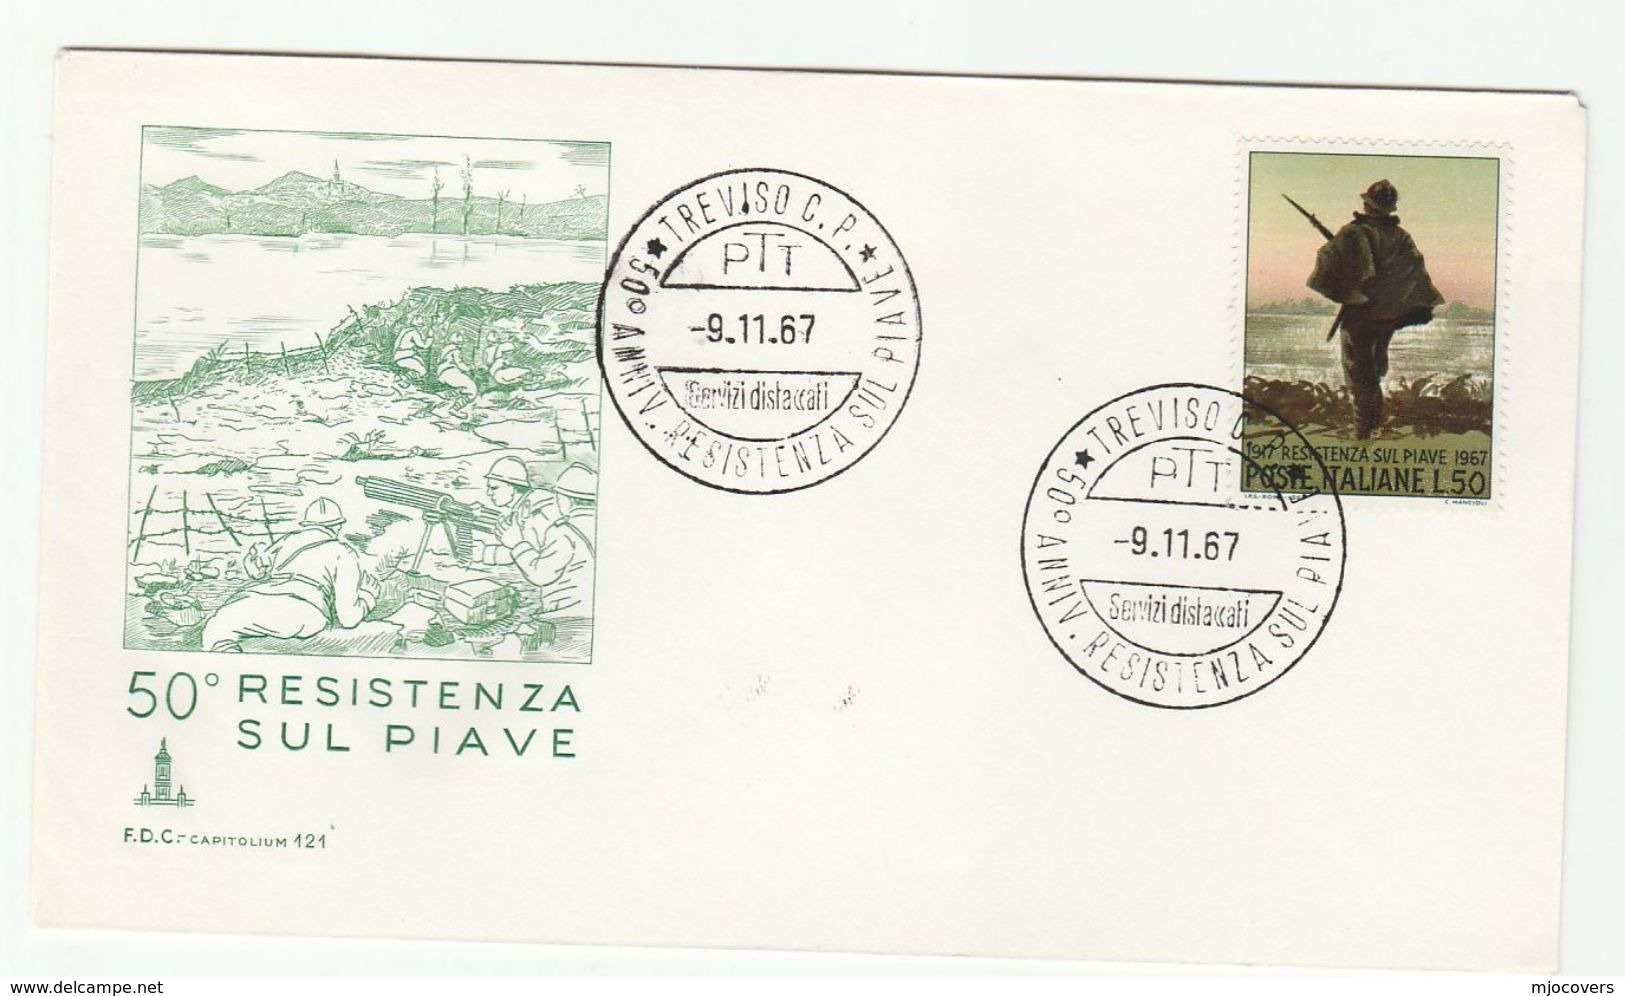 1967 Treviso  ITALY FDC WWI RESISTENZE Sul PIAVE 50th Anniiv Stamps Cover Military Army Forces - Guerre Mondiale (Première)